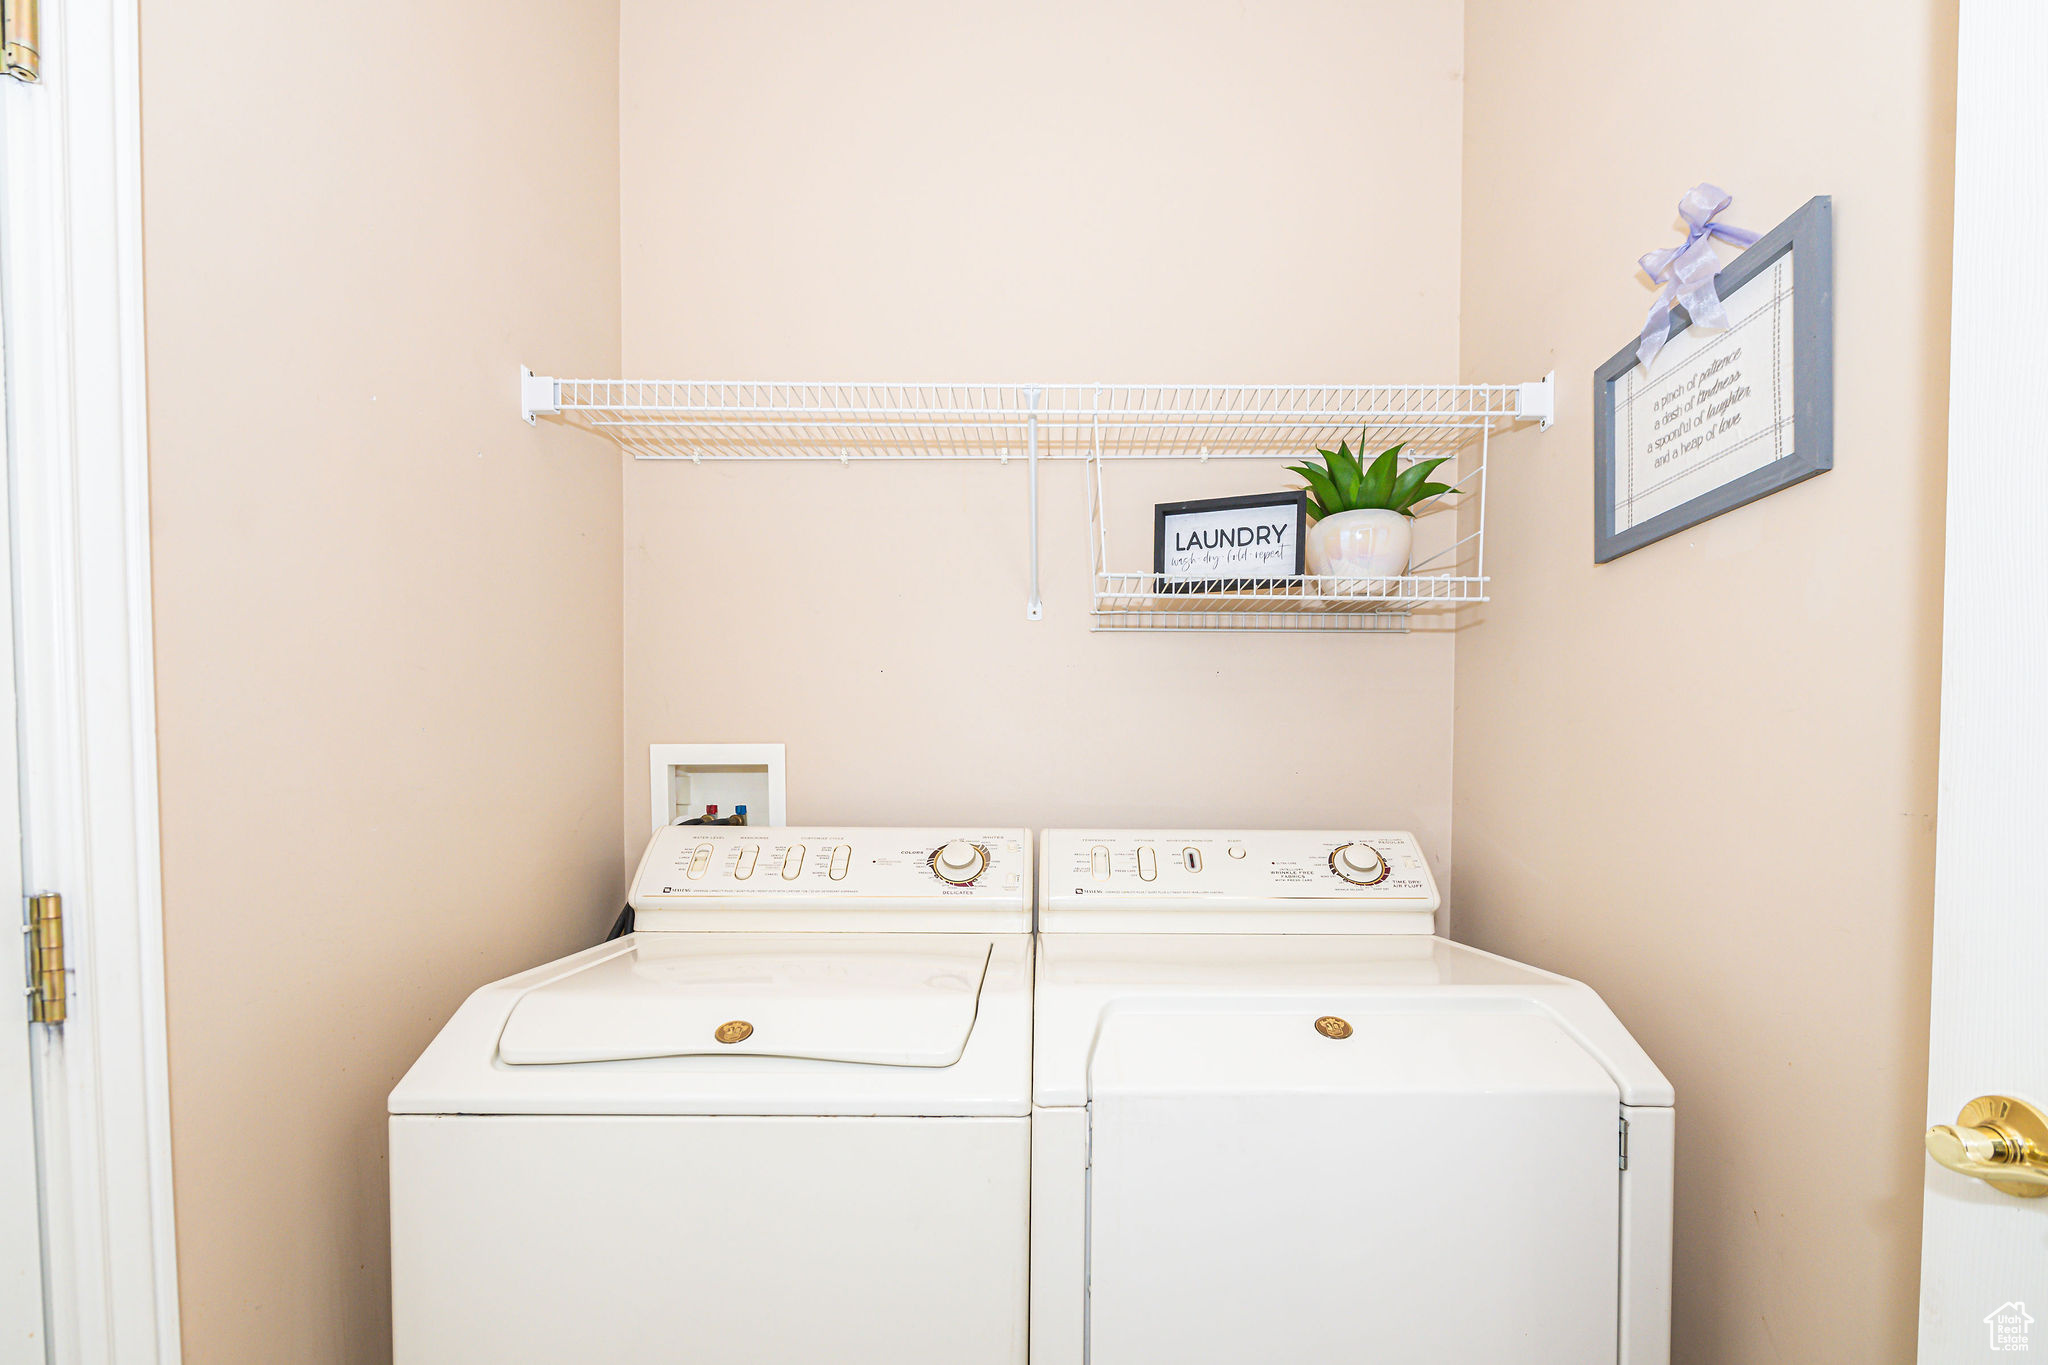 Laundry room with separate washer and dryer and washer hookup